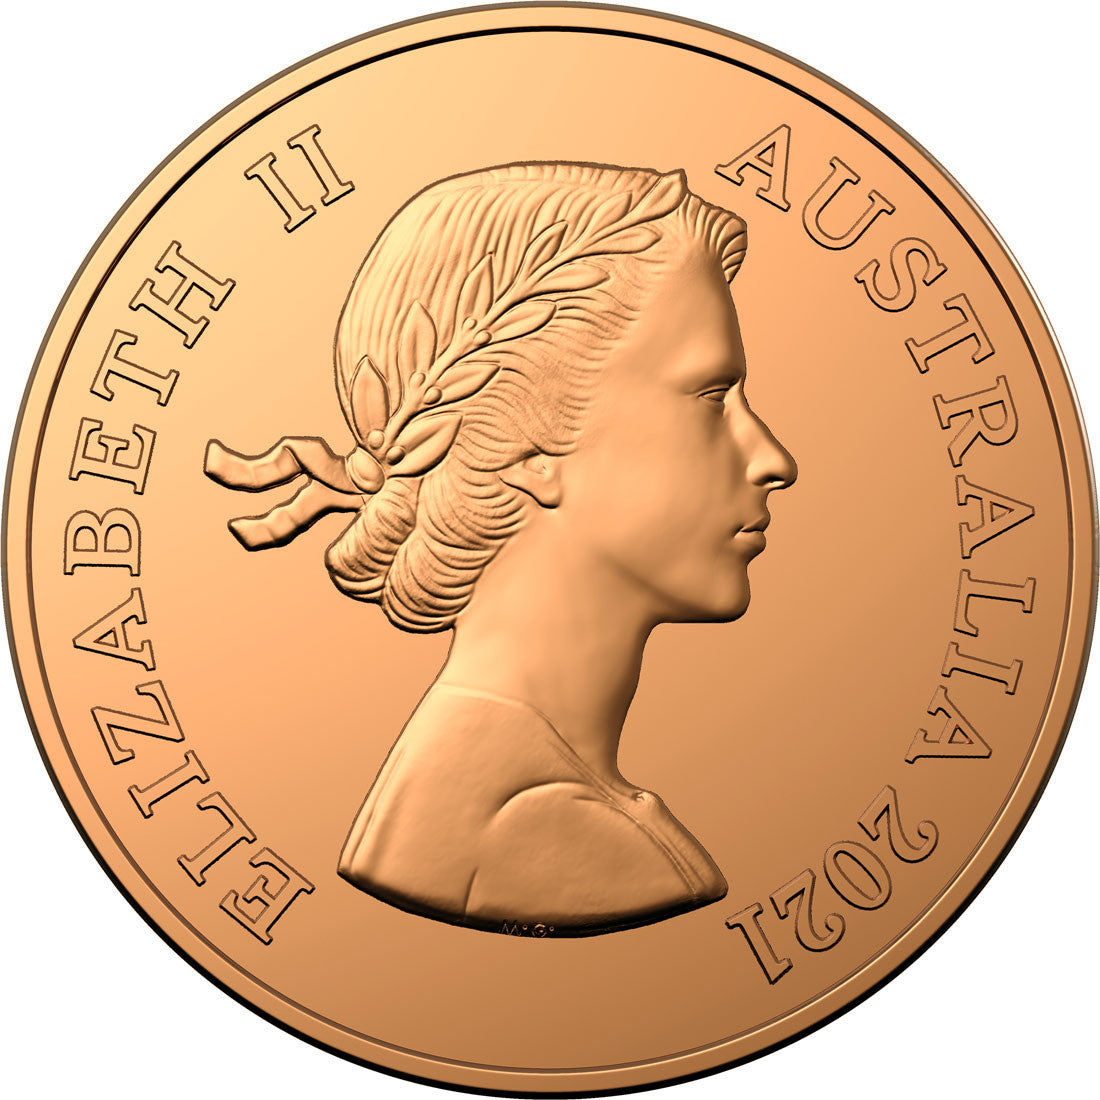 2021 $1 Copper Uncirculated Coin -110th Anniversary of Penny - WHJ Blakemore